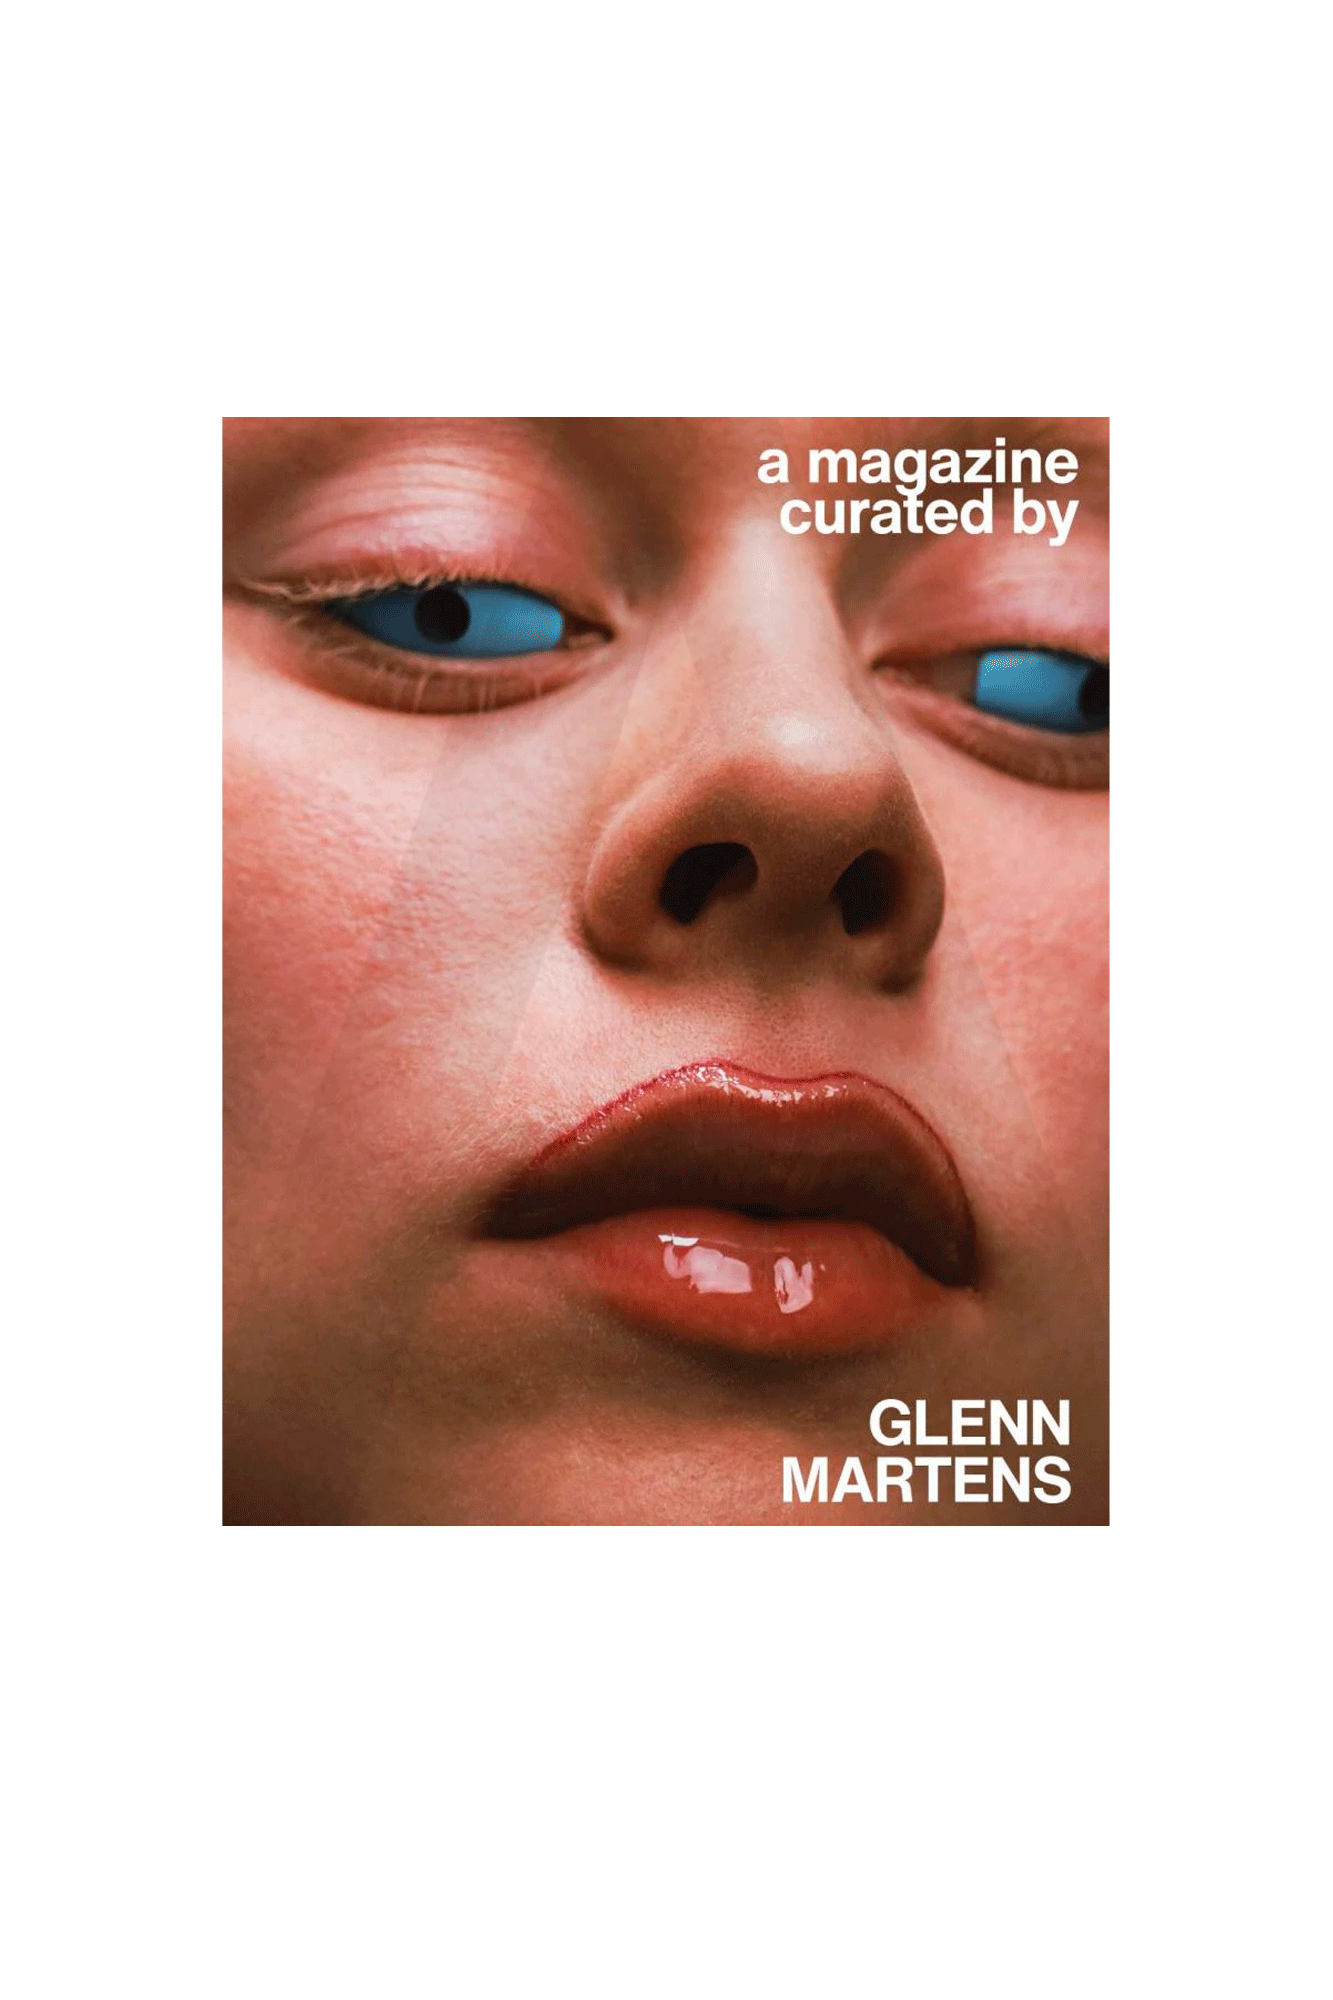 Issue 27 Curated By Glenn Martens